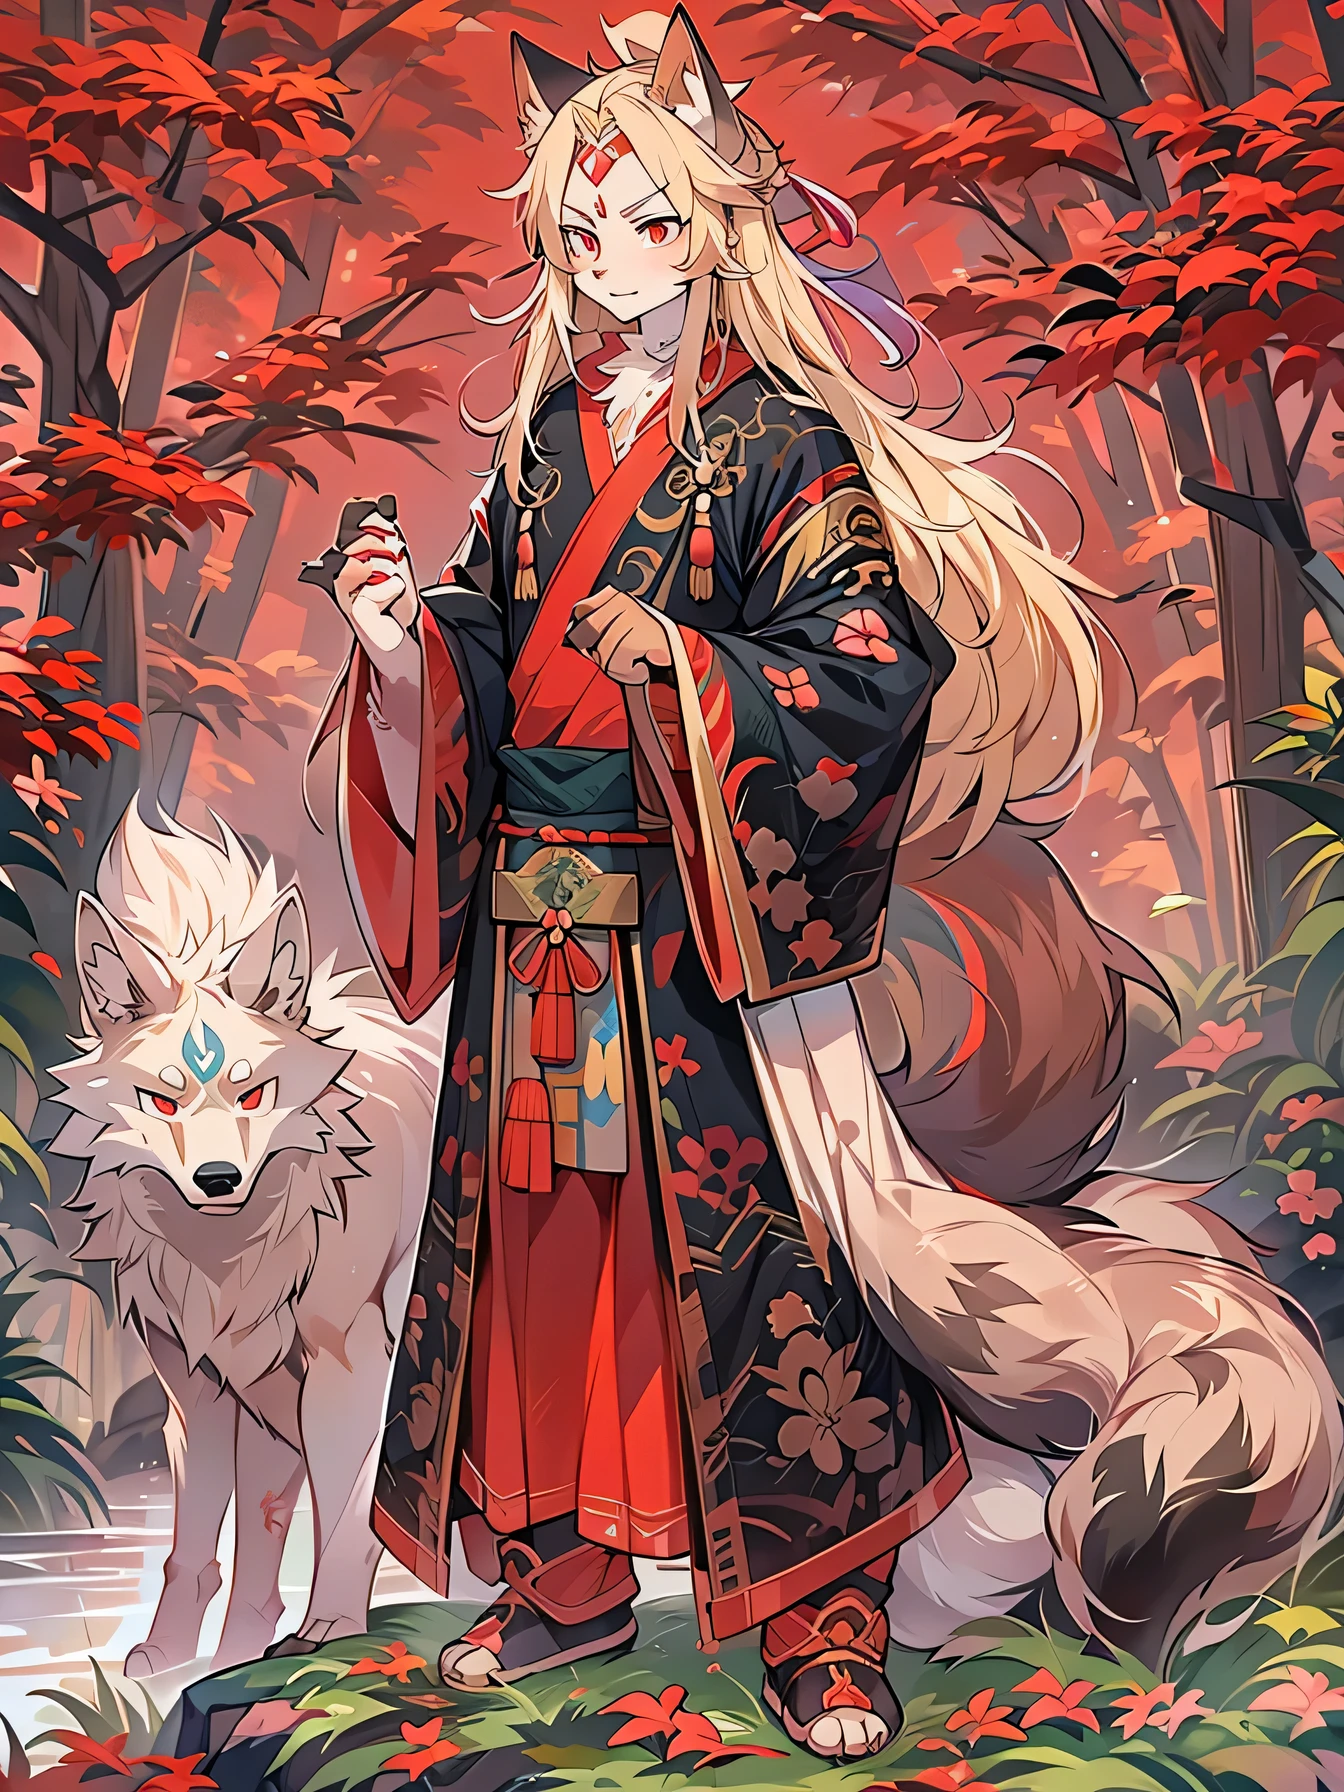 The male wolf is 160 cm tall， red eyes, , Long blonde hair, end,  perfect body figure，Red and black Ming Dynasty brocade clothing，very serious look，Two small ears， standing in forest